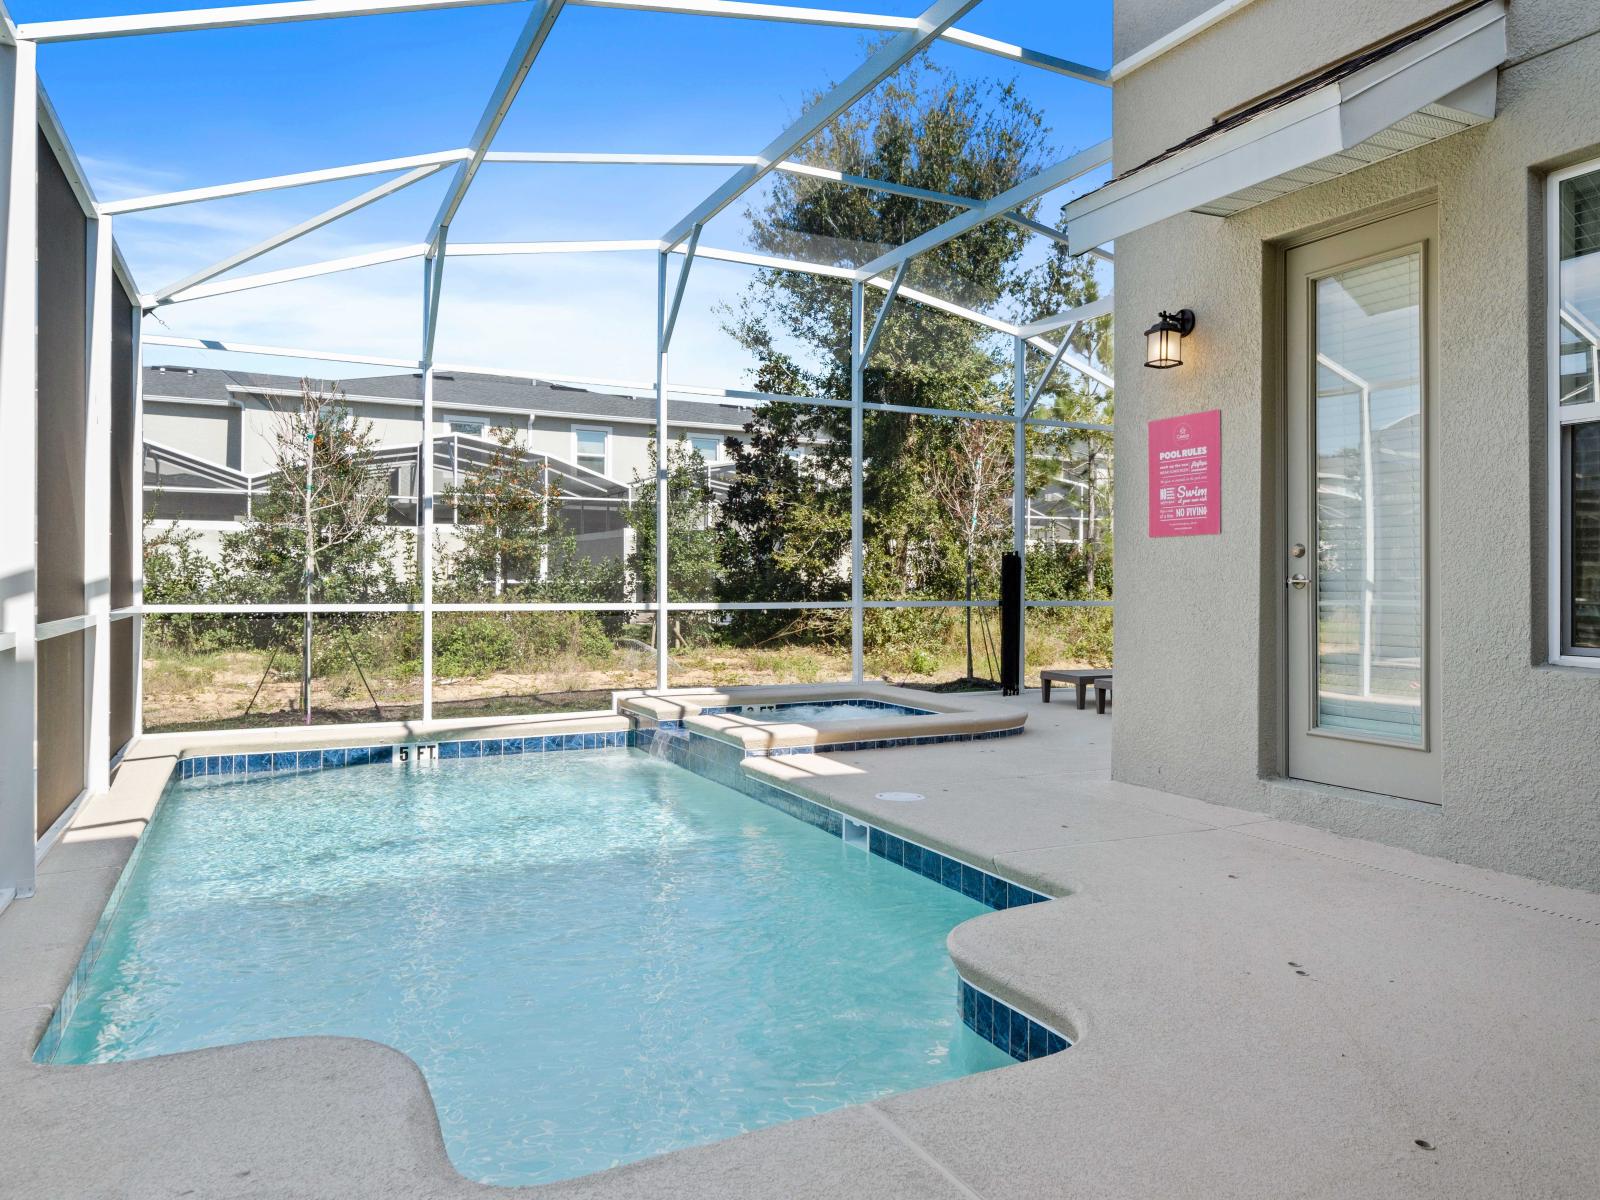 Pleasant Private Pool Area of the Home in Davenport Florida - Immerse yourself in serenity with outdoor pool  - Tranquil retreat for the ultimate getaway